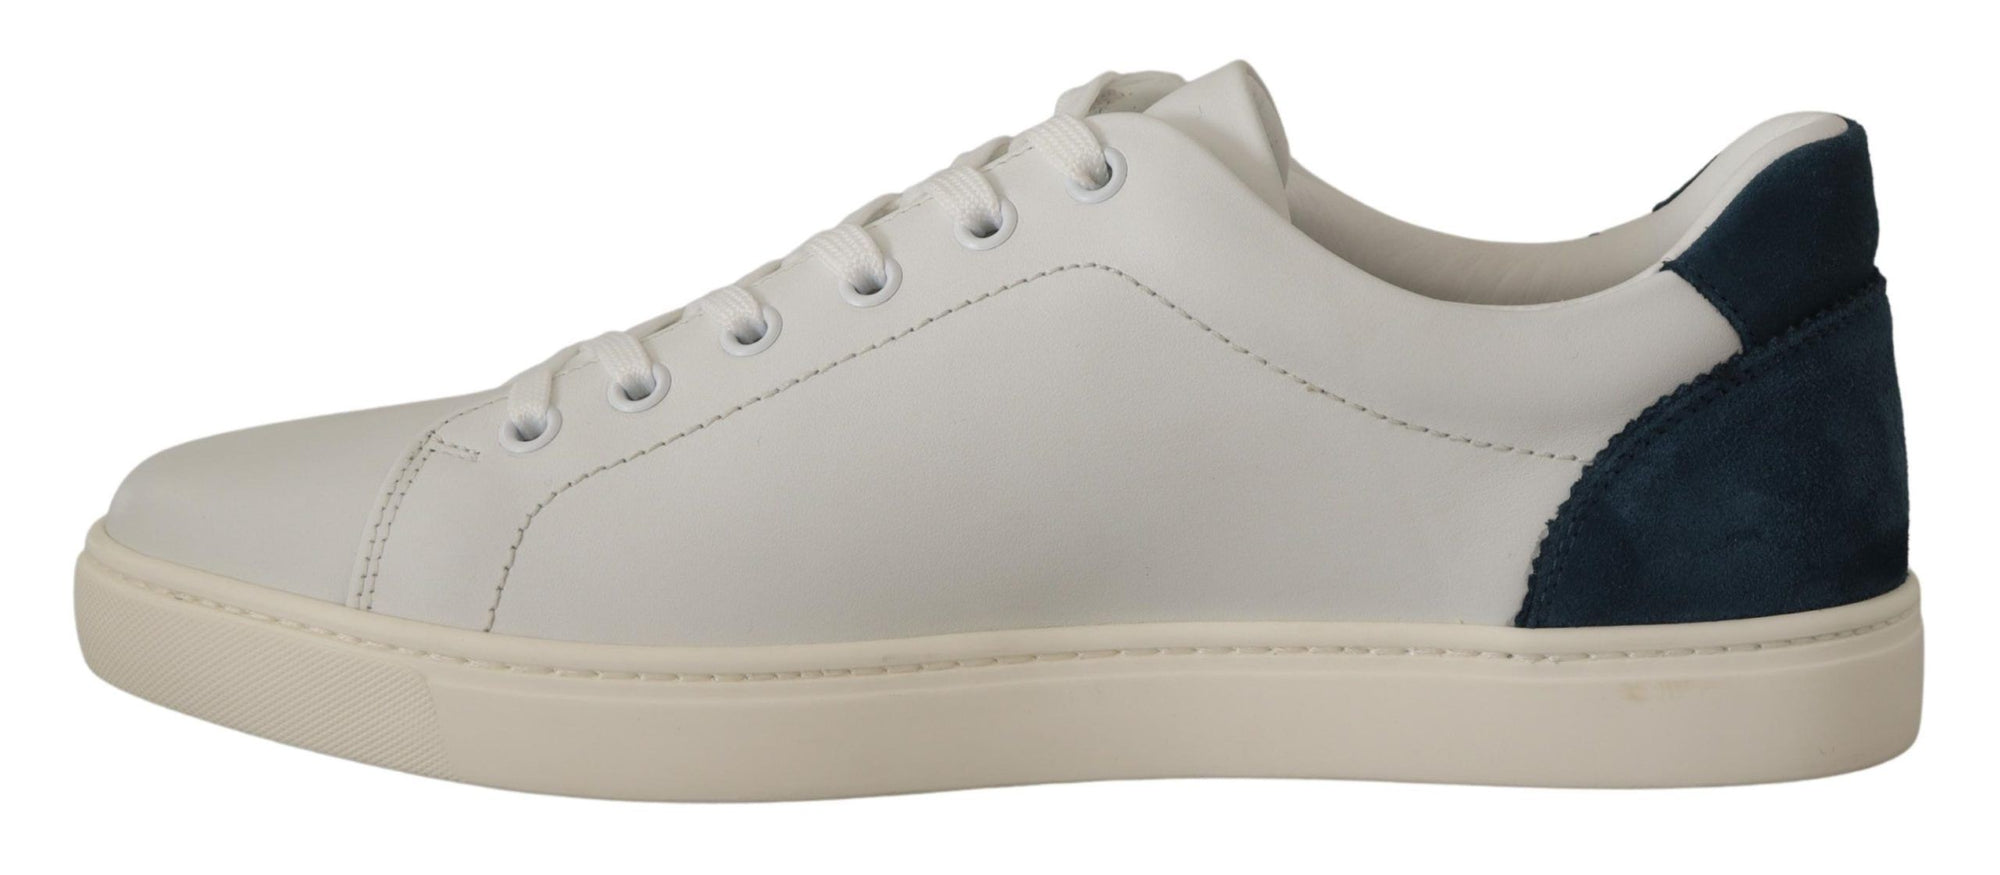 Chic White Leather Low-Top Sneakers